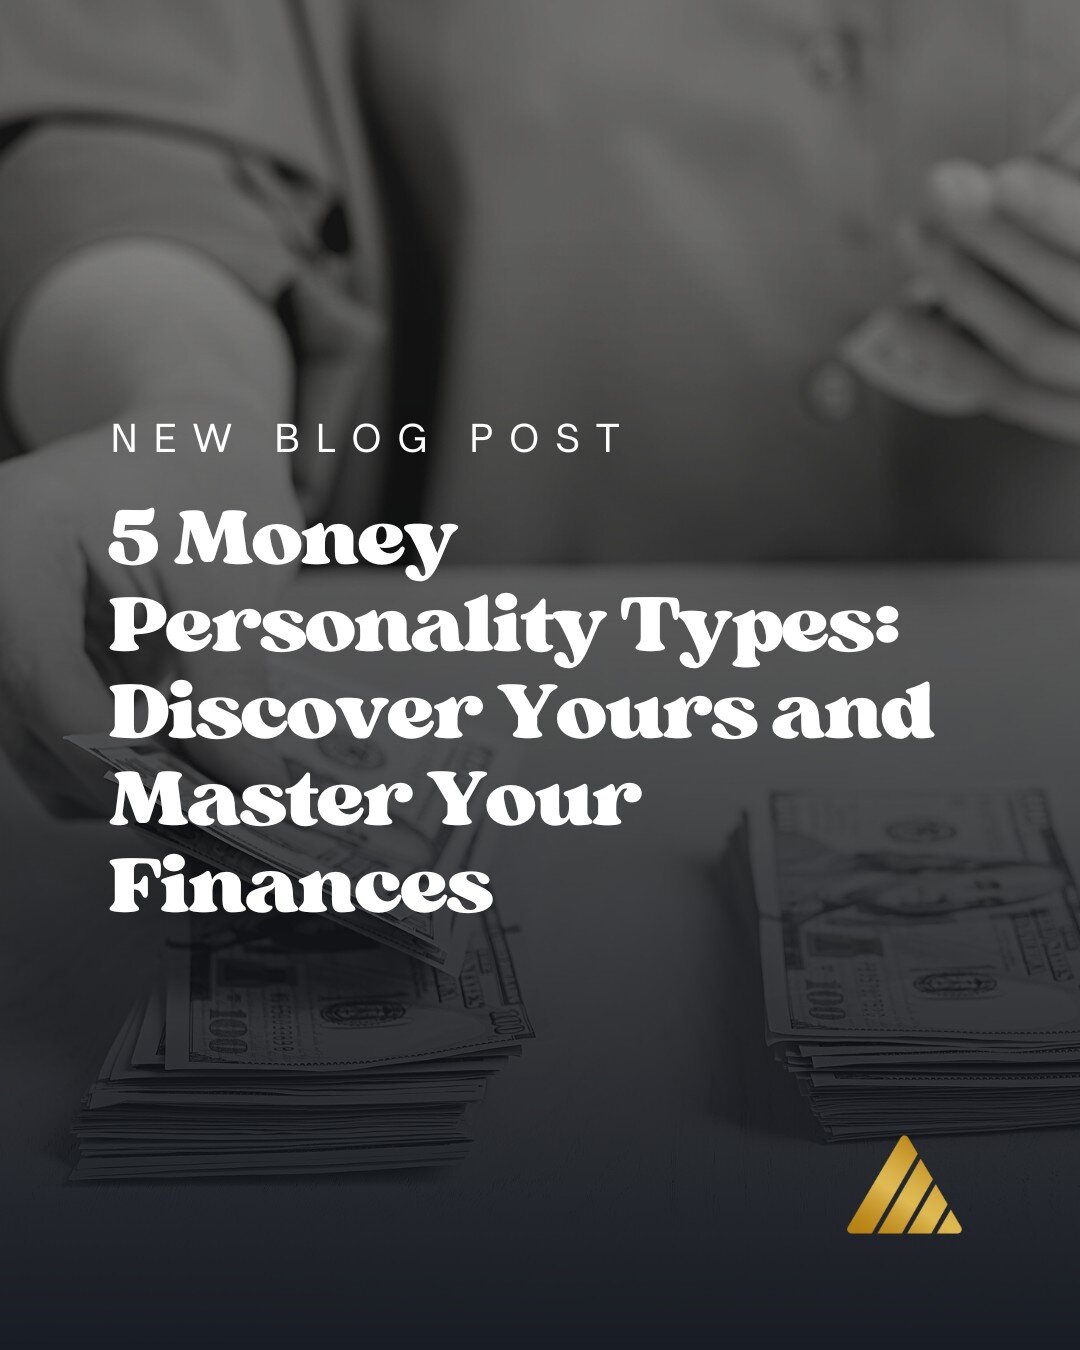 🔍 Ever wondered why you spend the way you do? It's all about your money personality! 

Our latest blog post dives into the five common money personalities and offers insights on how each can best manage their finances. Discover which type you are an